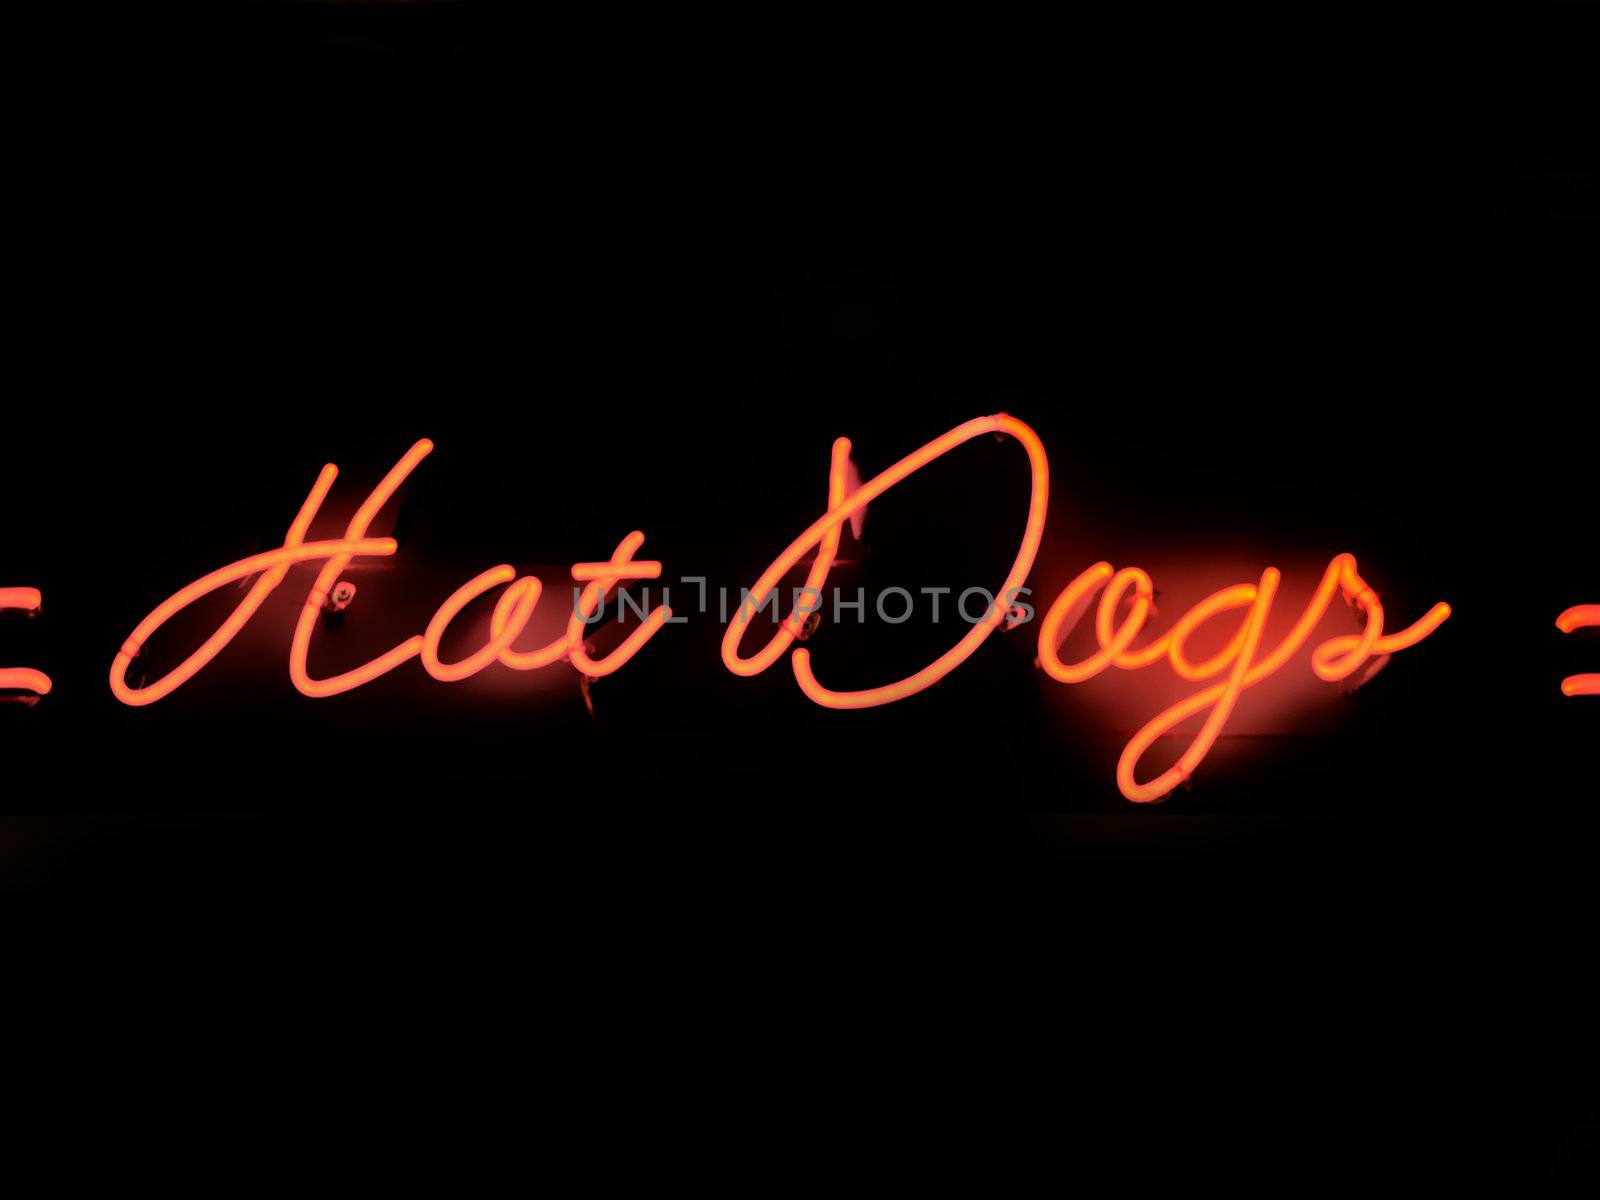 hot dogs neon sign by zkruger